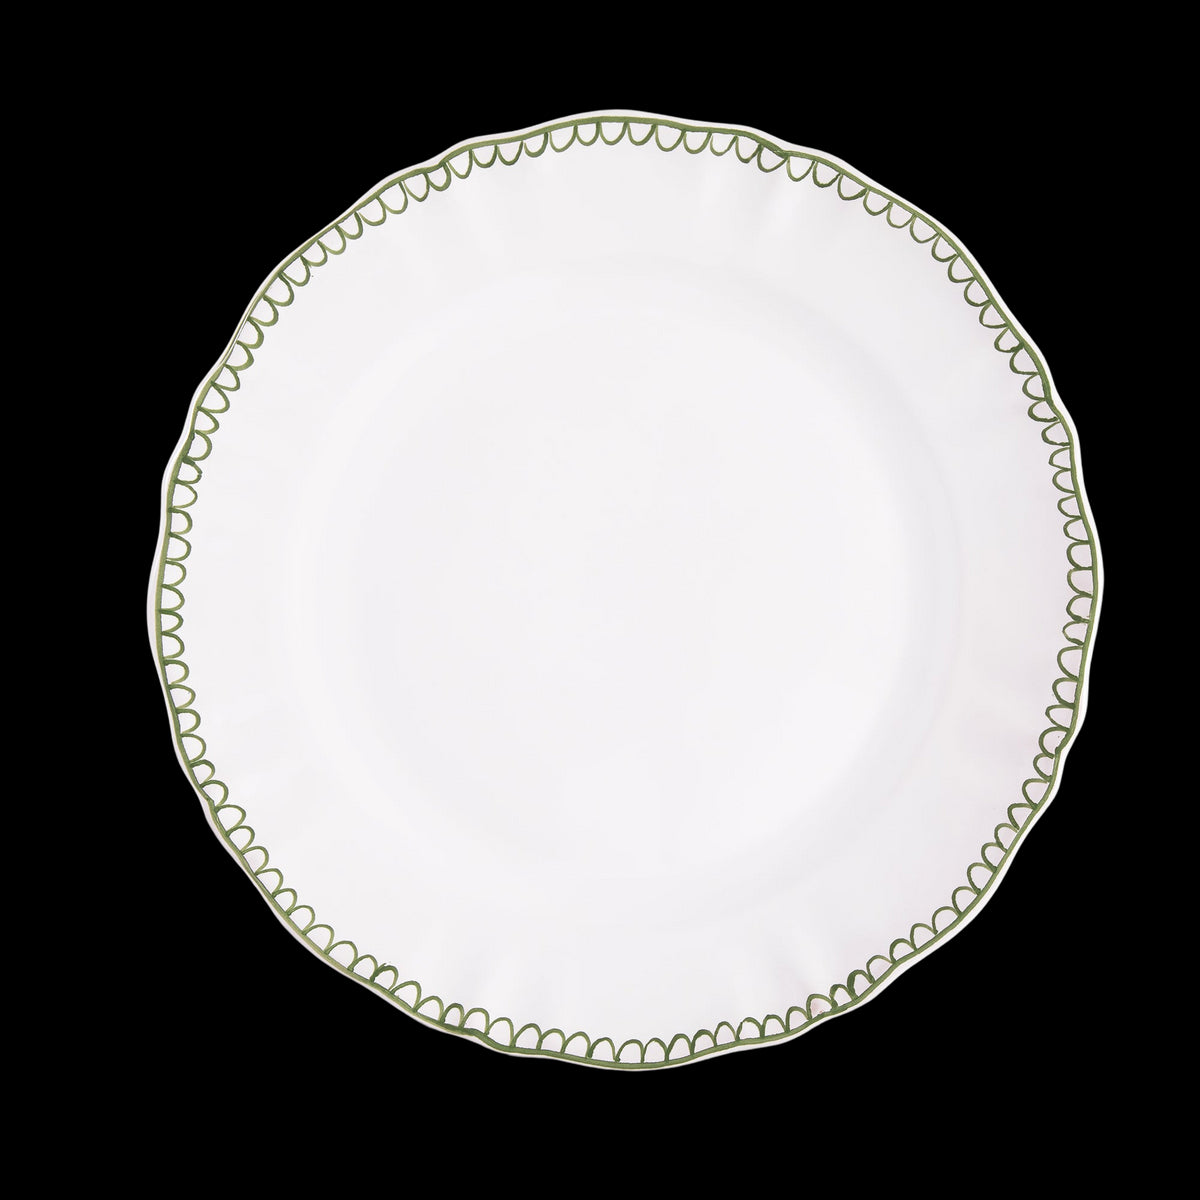 Bouclette Salad Plate in Green